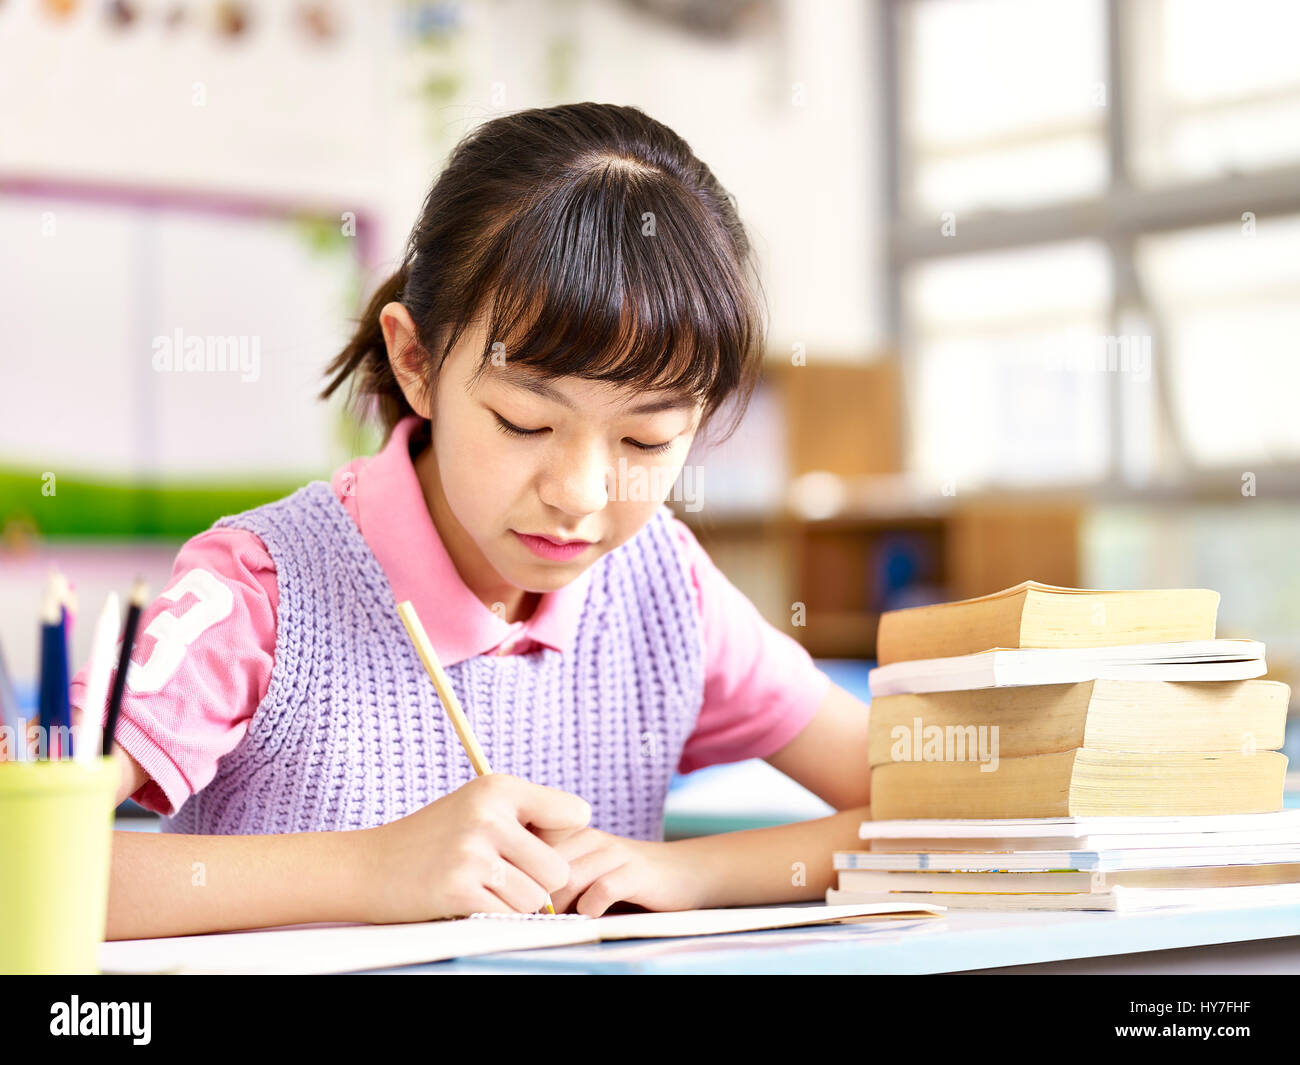 asian elementary schoolgirl studying or doing course work in classroom. Stock Photo